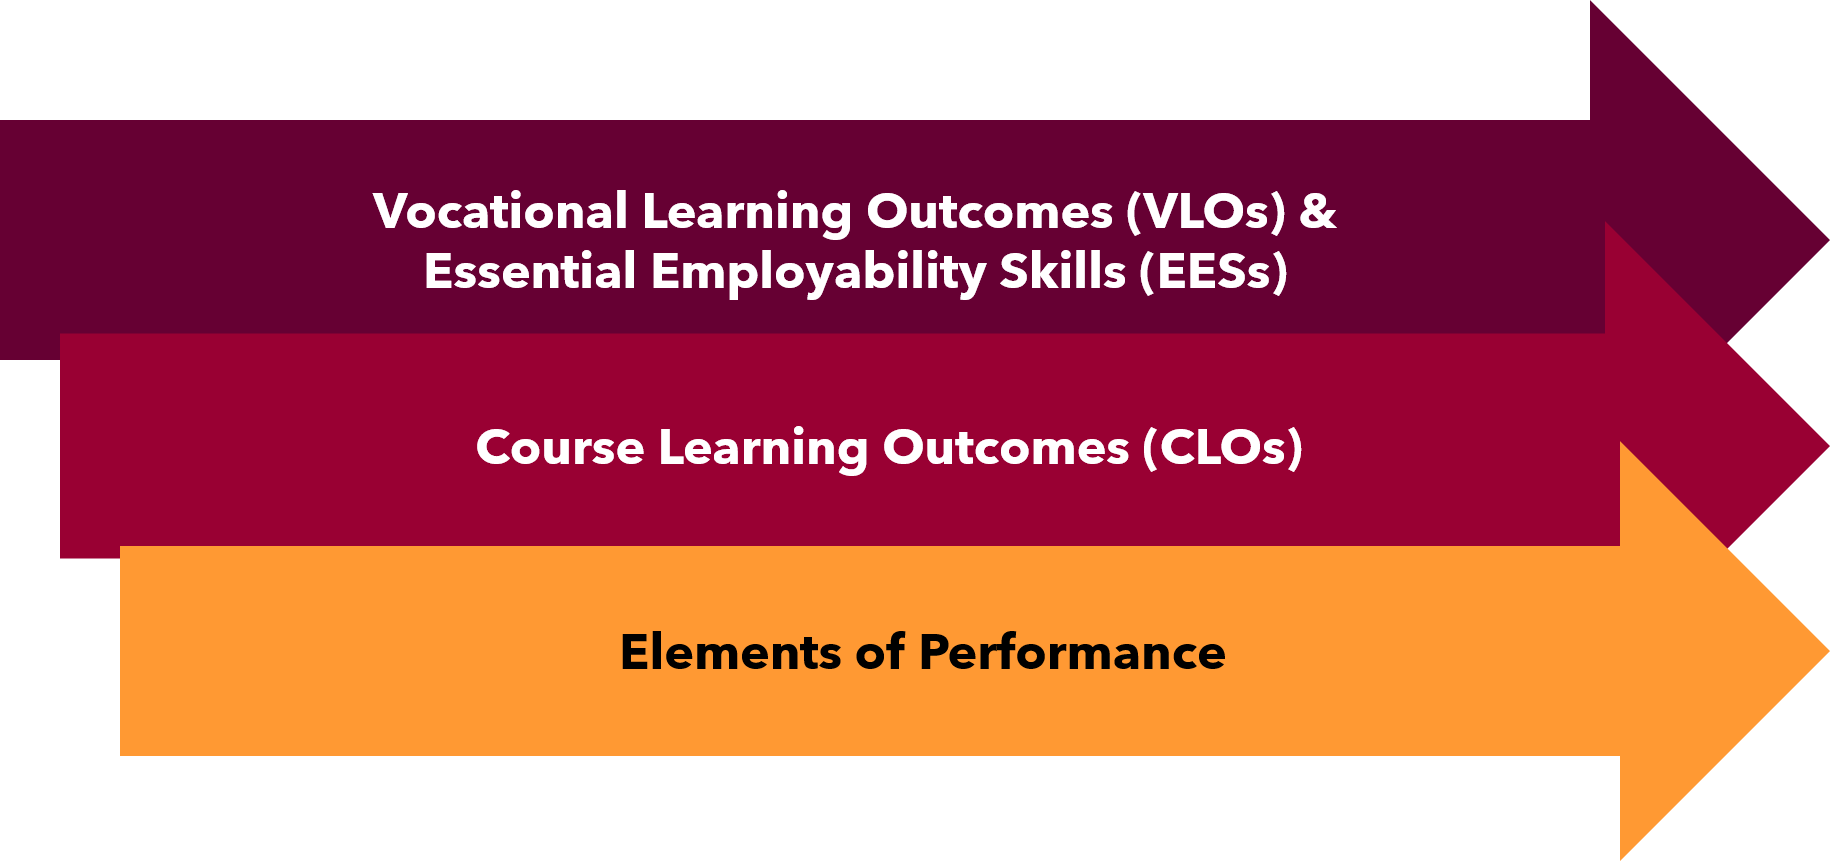 Three arrows are stacked in a row. The largest arrow is on top, for Vocational Learning Outcomes or VLOs and Essential Employability Skills, or EESs. The second arrow is slightly smaller and is for Course Learning Outcomes. The bottom arrow is even smaller and is for Elements of Performance.